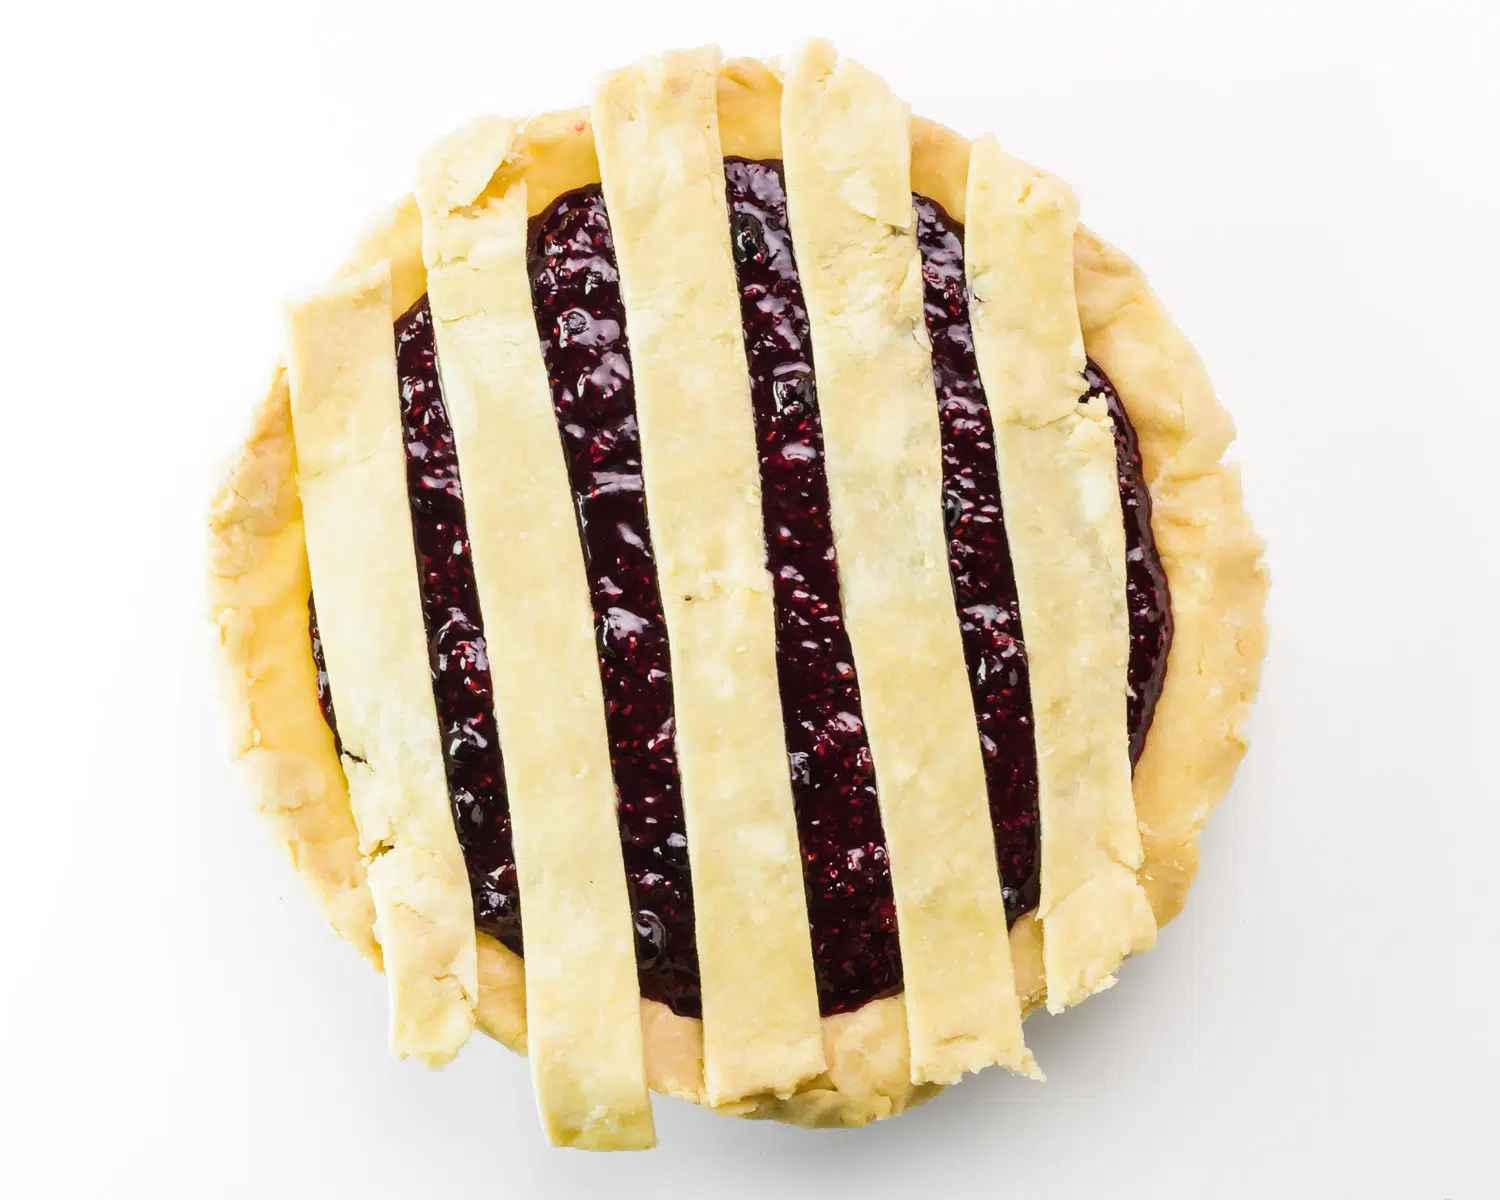 Strips of dough have been added on top of a berry pie.